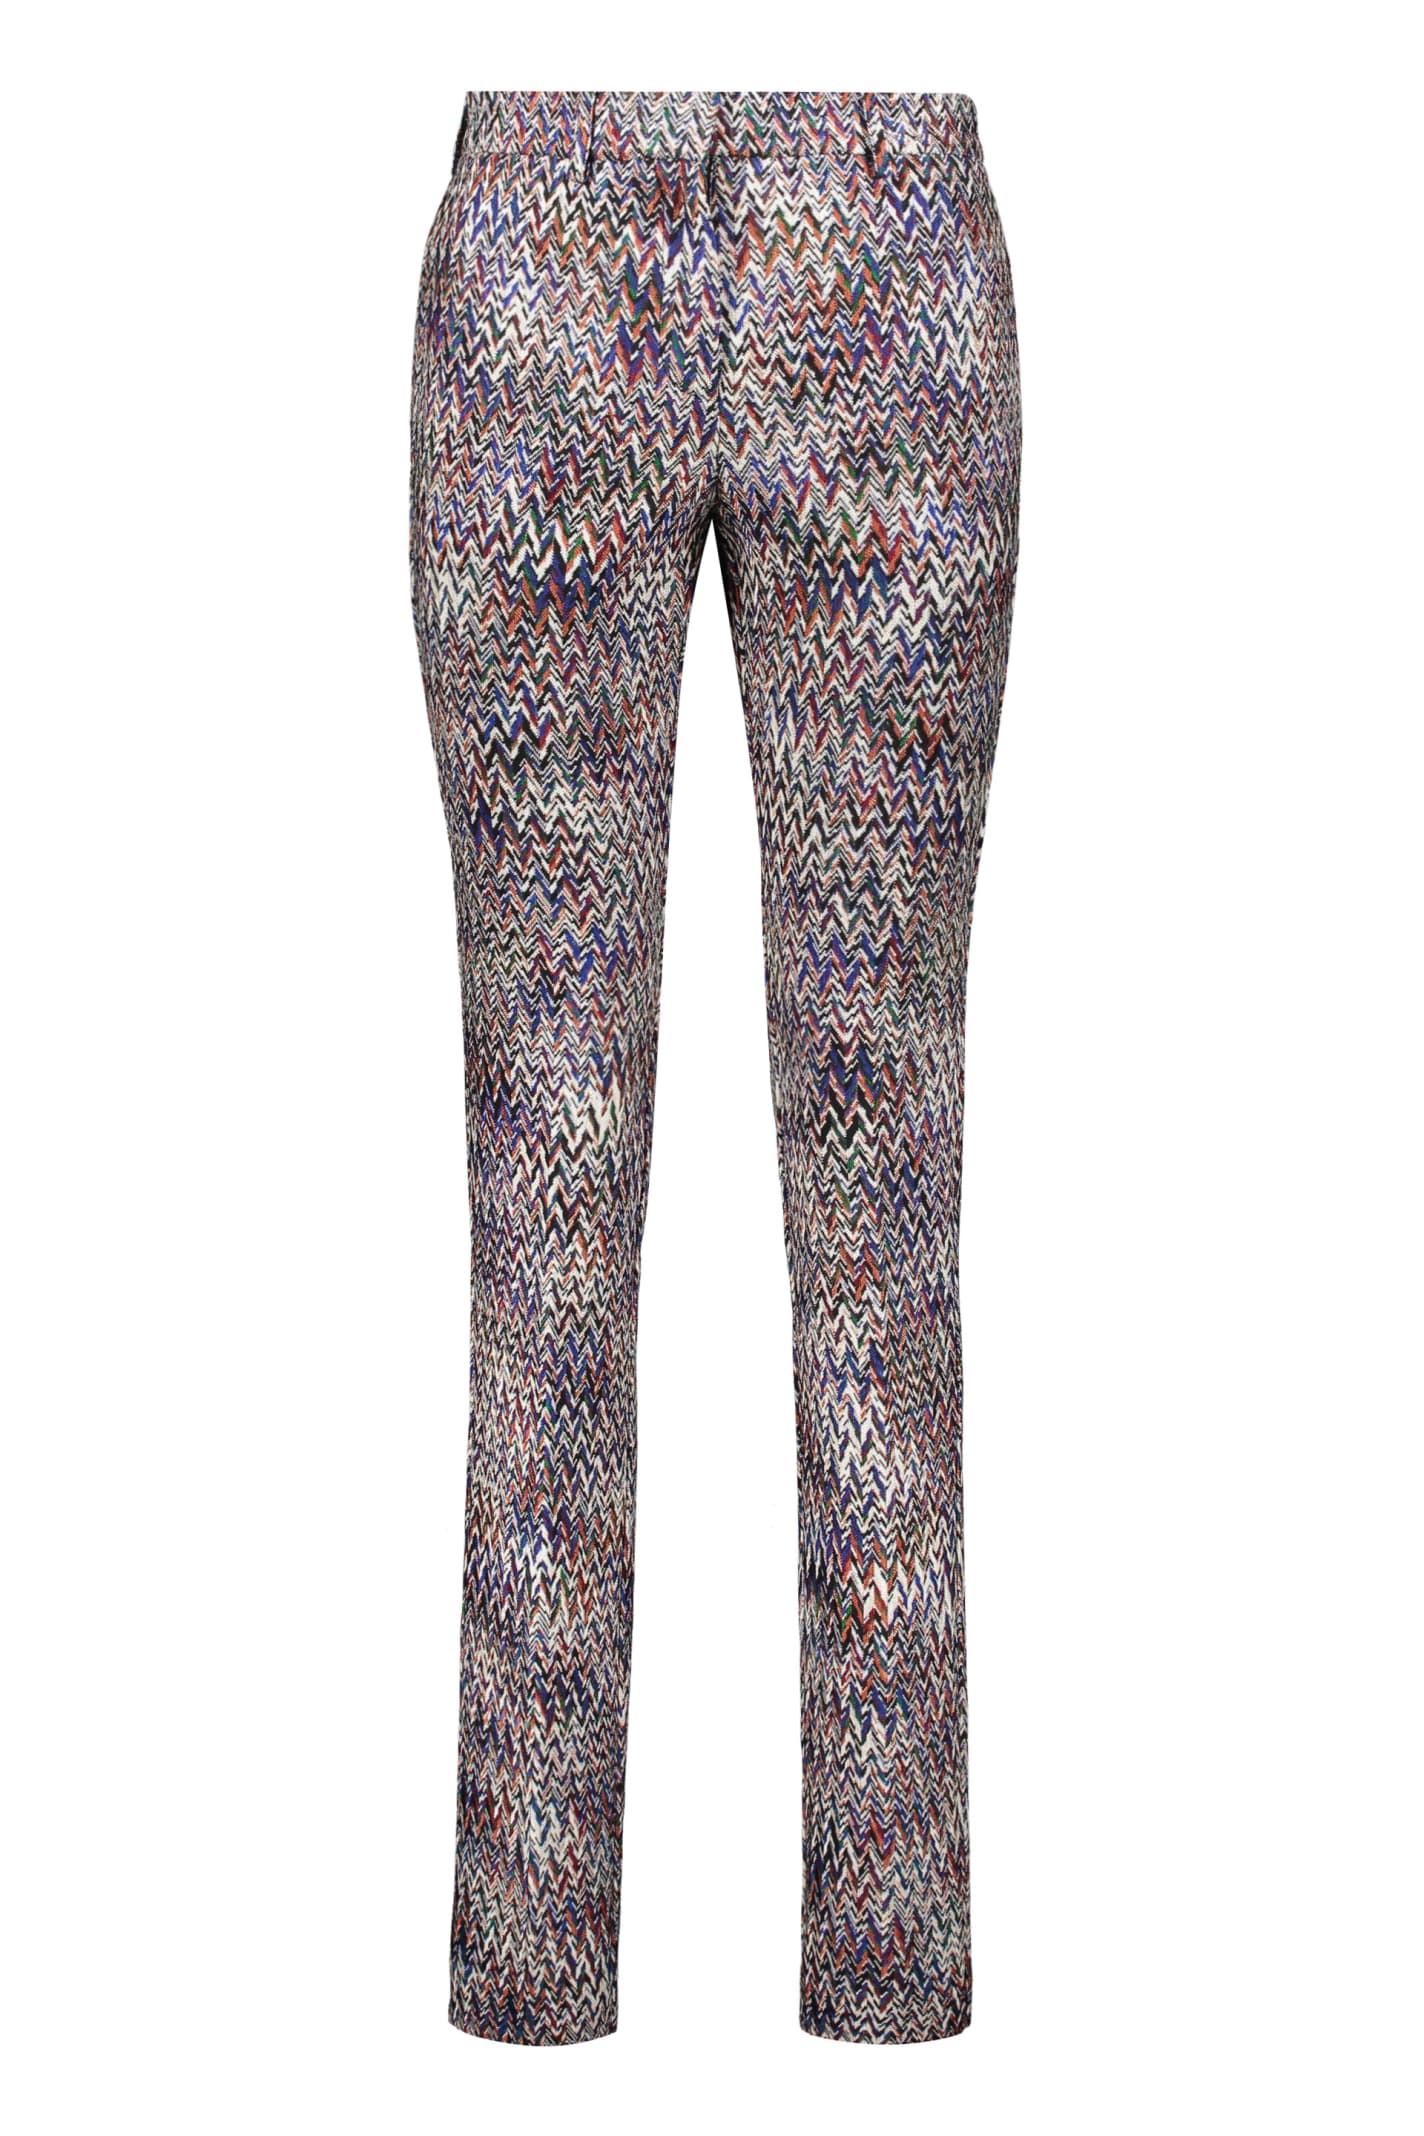 Missoni Chevron Knitted Palazzo Trousers In Multicolor